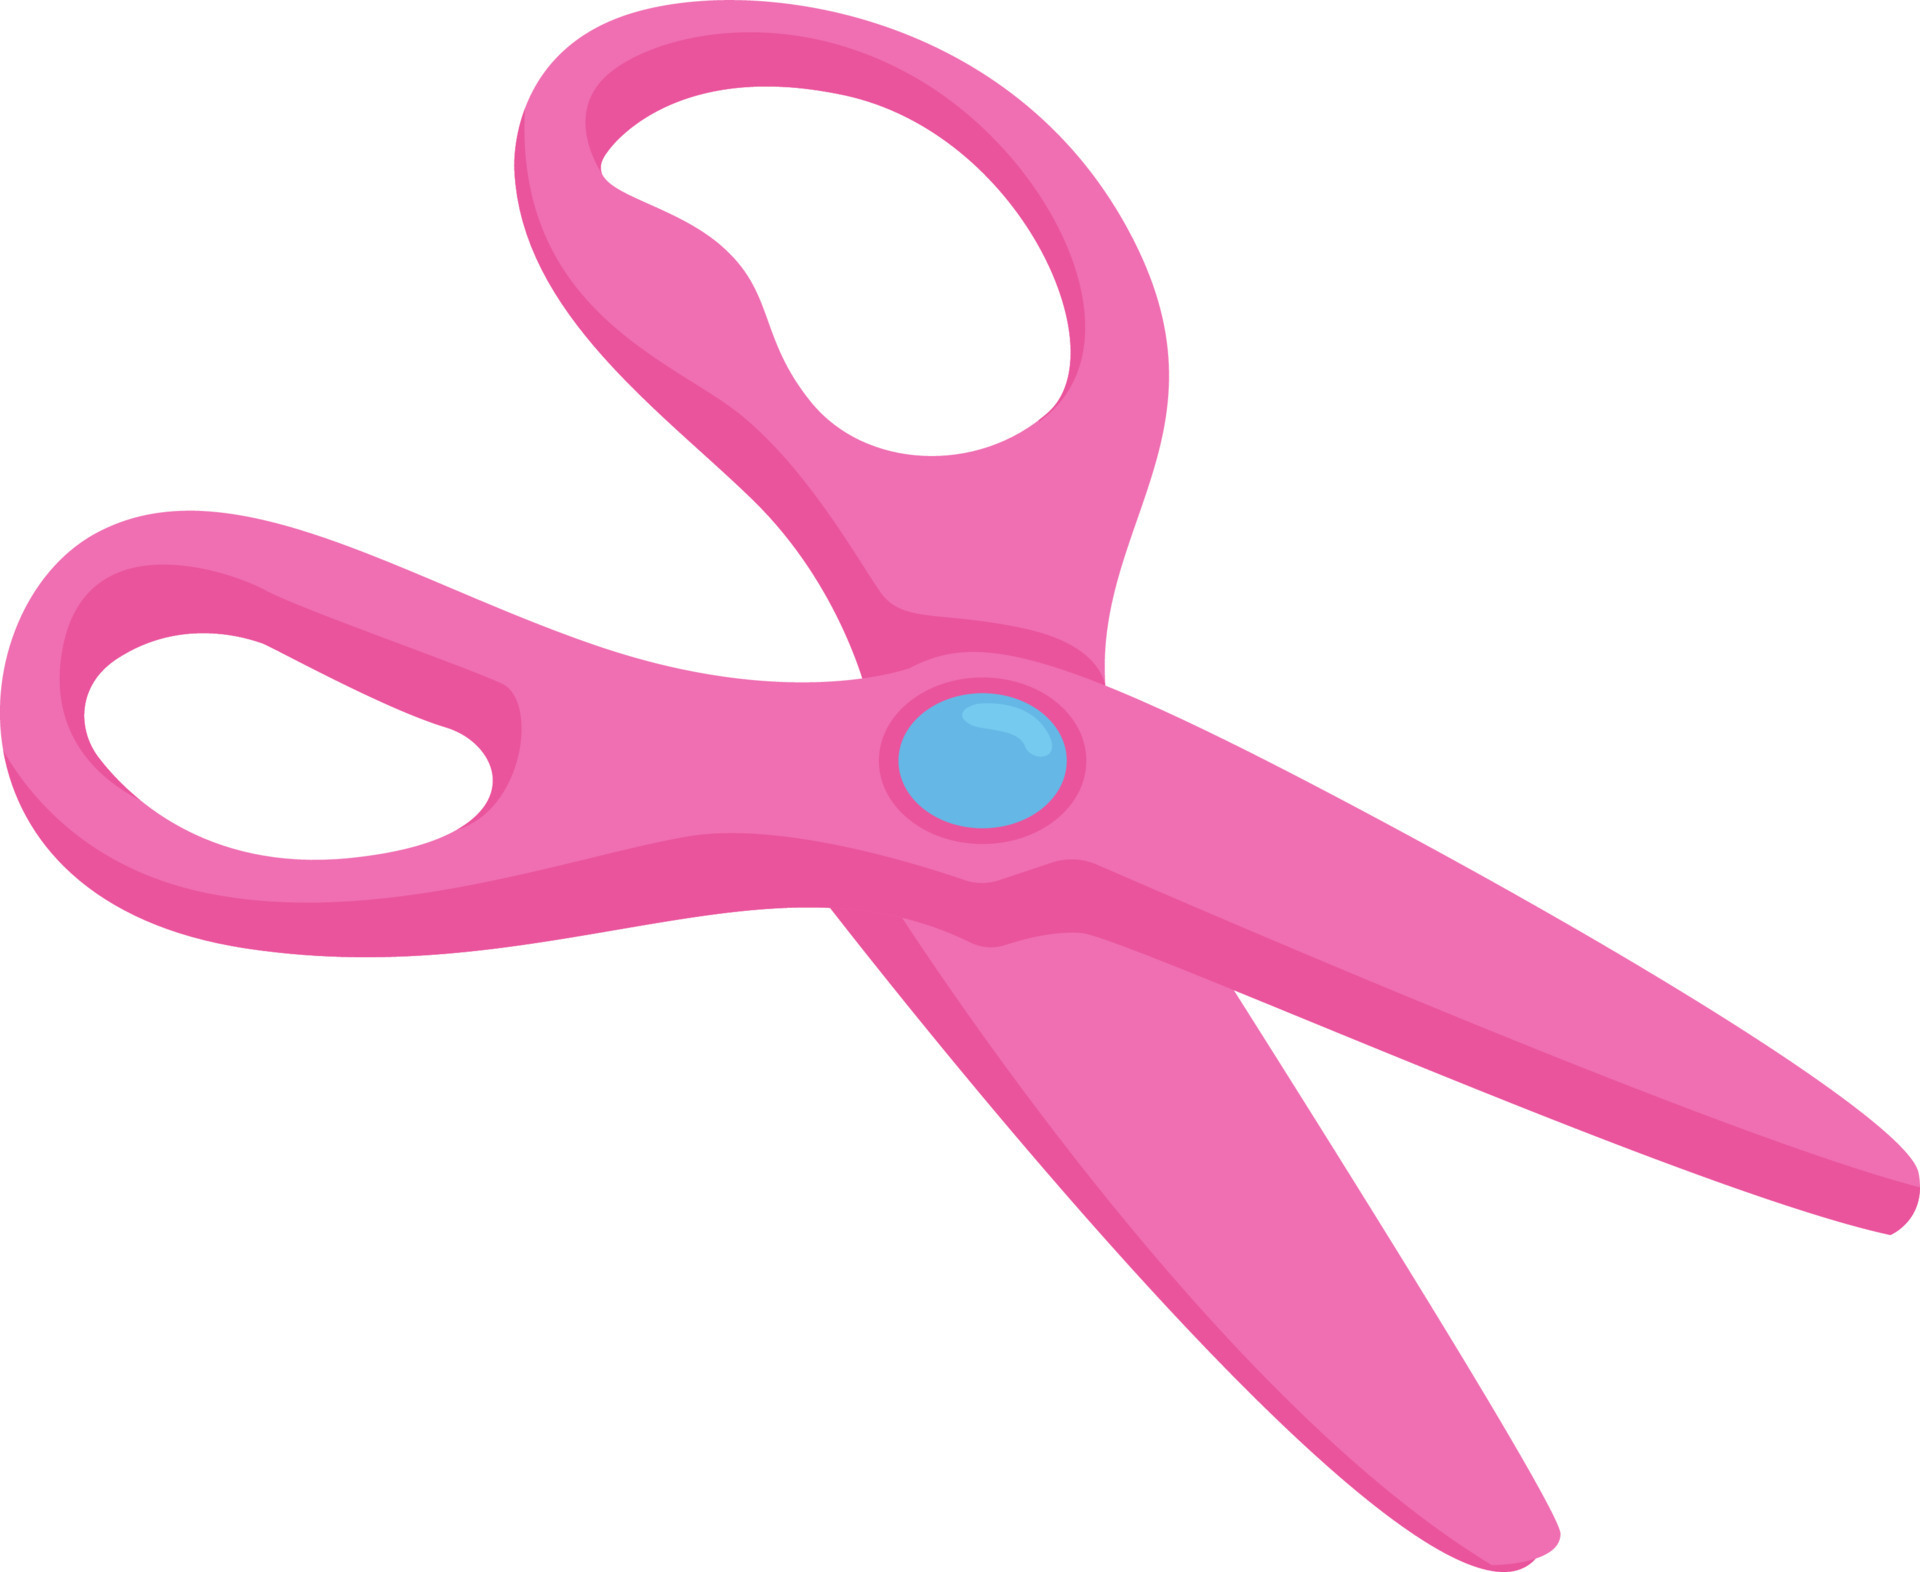 Pink scissors, illustration, vector on a white background